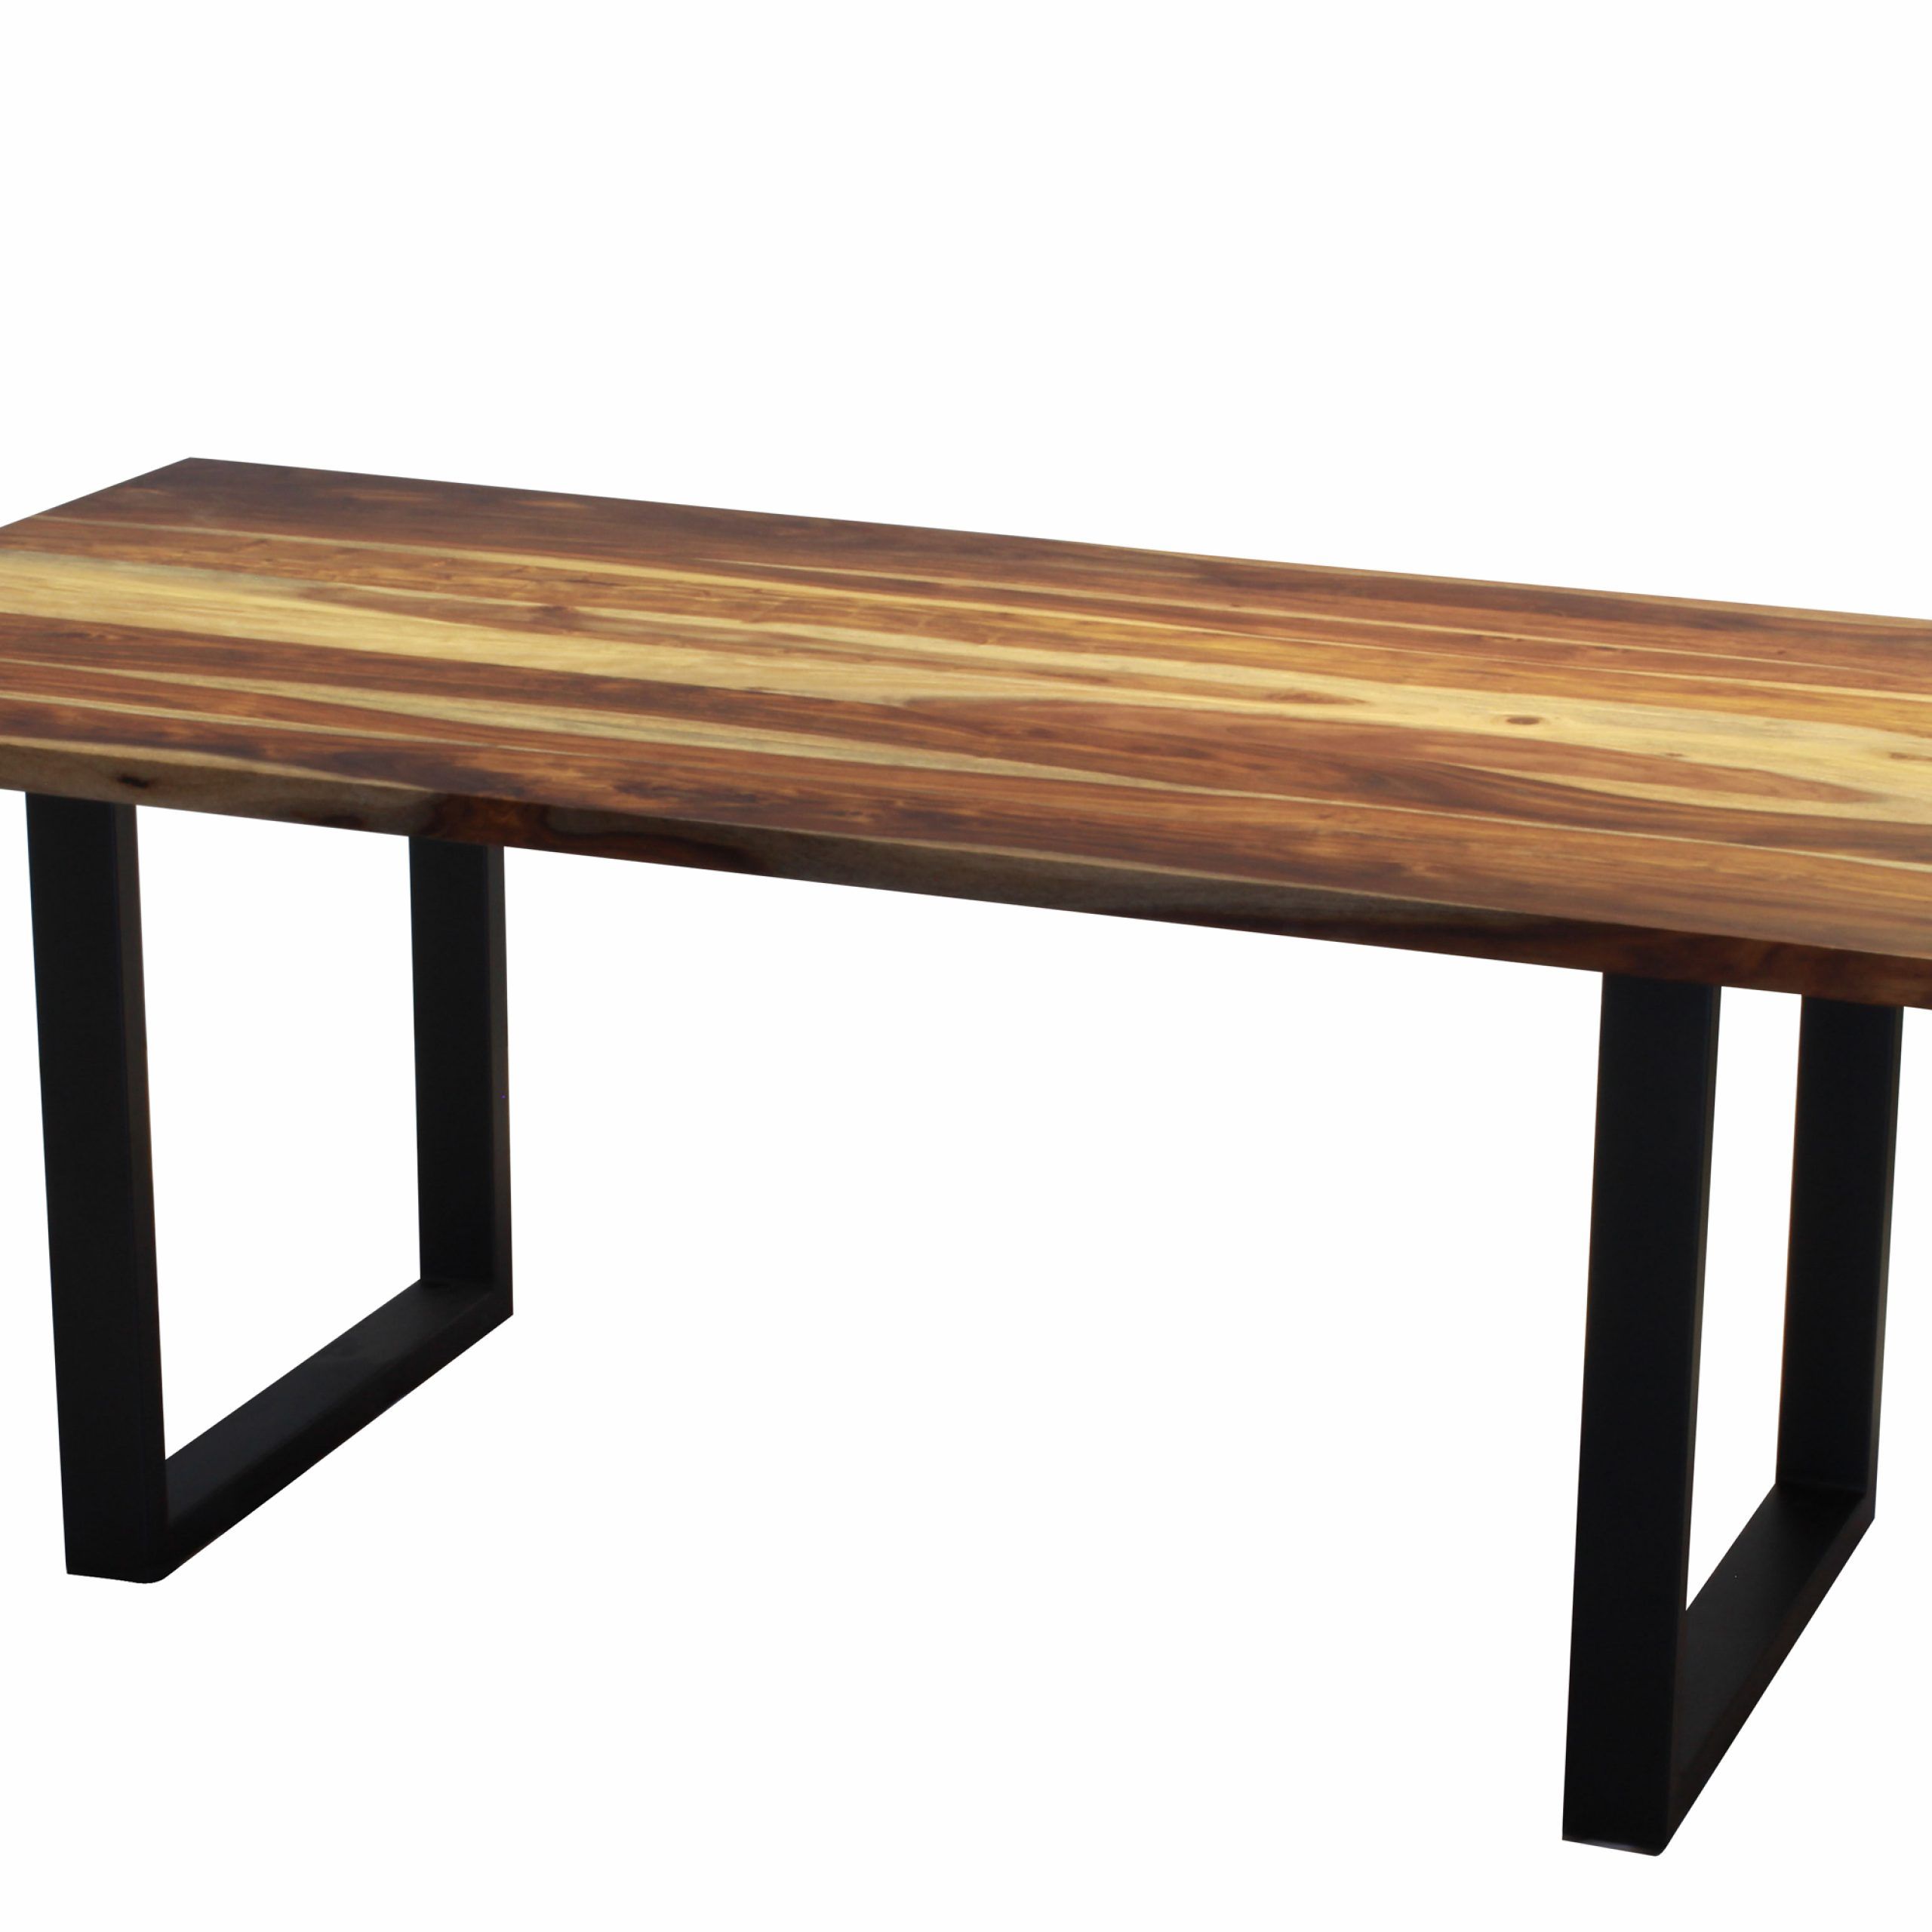 Most Recently Released Acacia Dining Tables With Black Rocket Legs Regarding Corcoran Acacia Live Edge Dining Table With Black Rocket Legs – 72" (View 4 of 25)